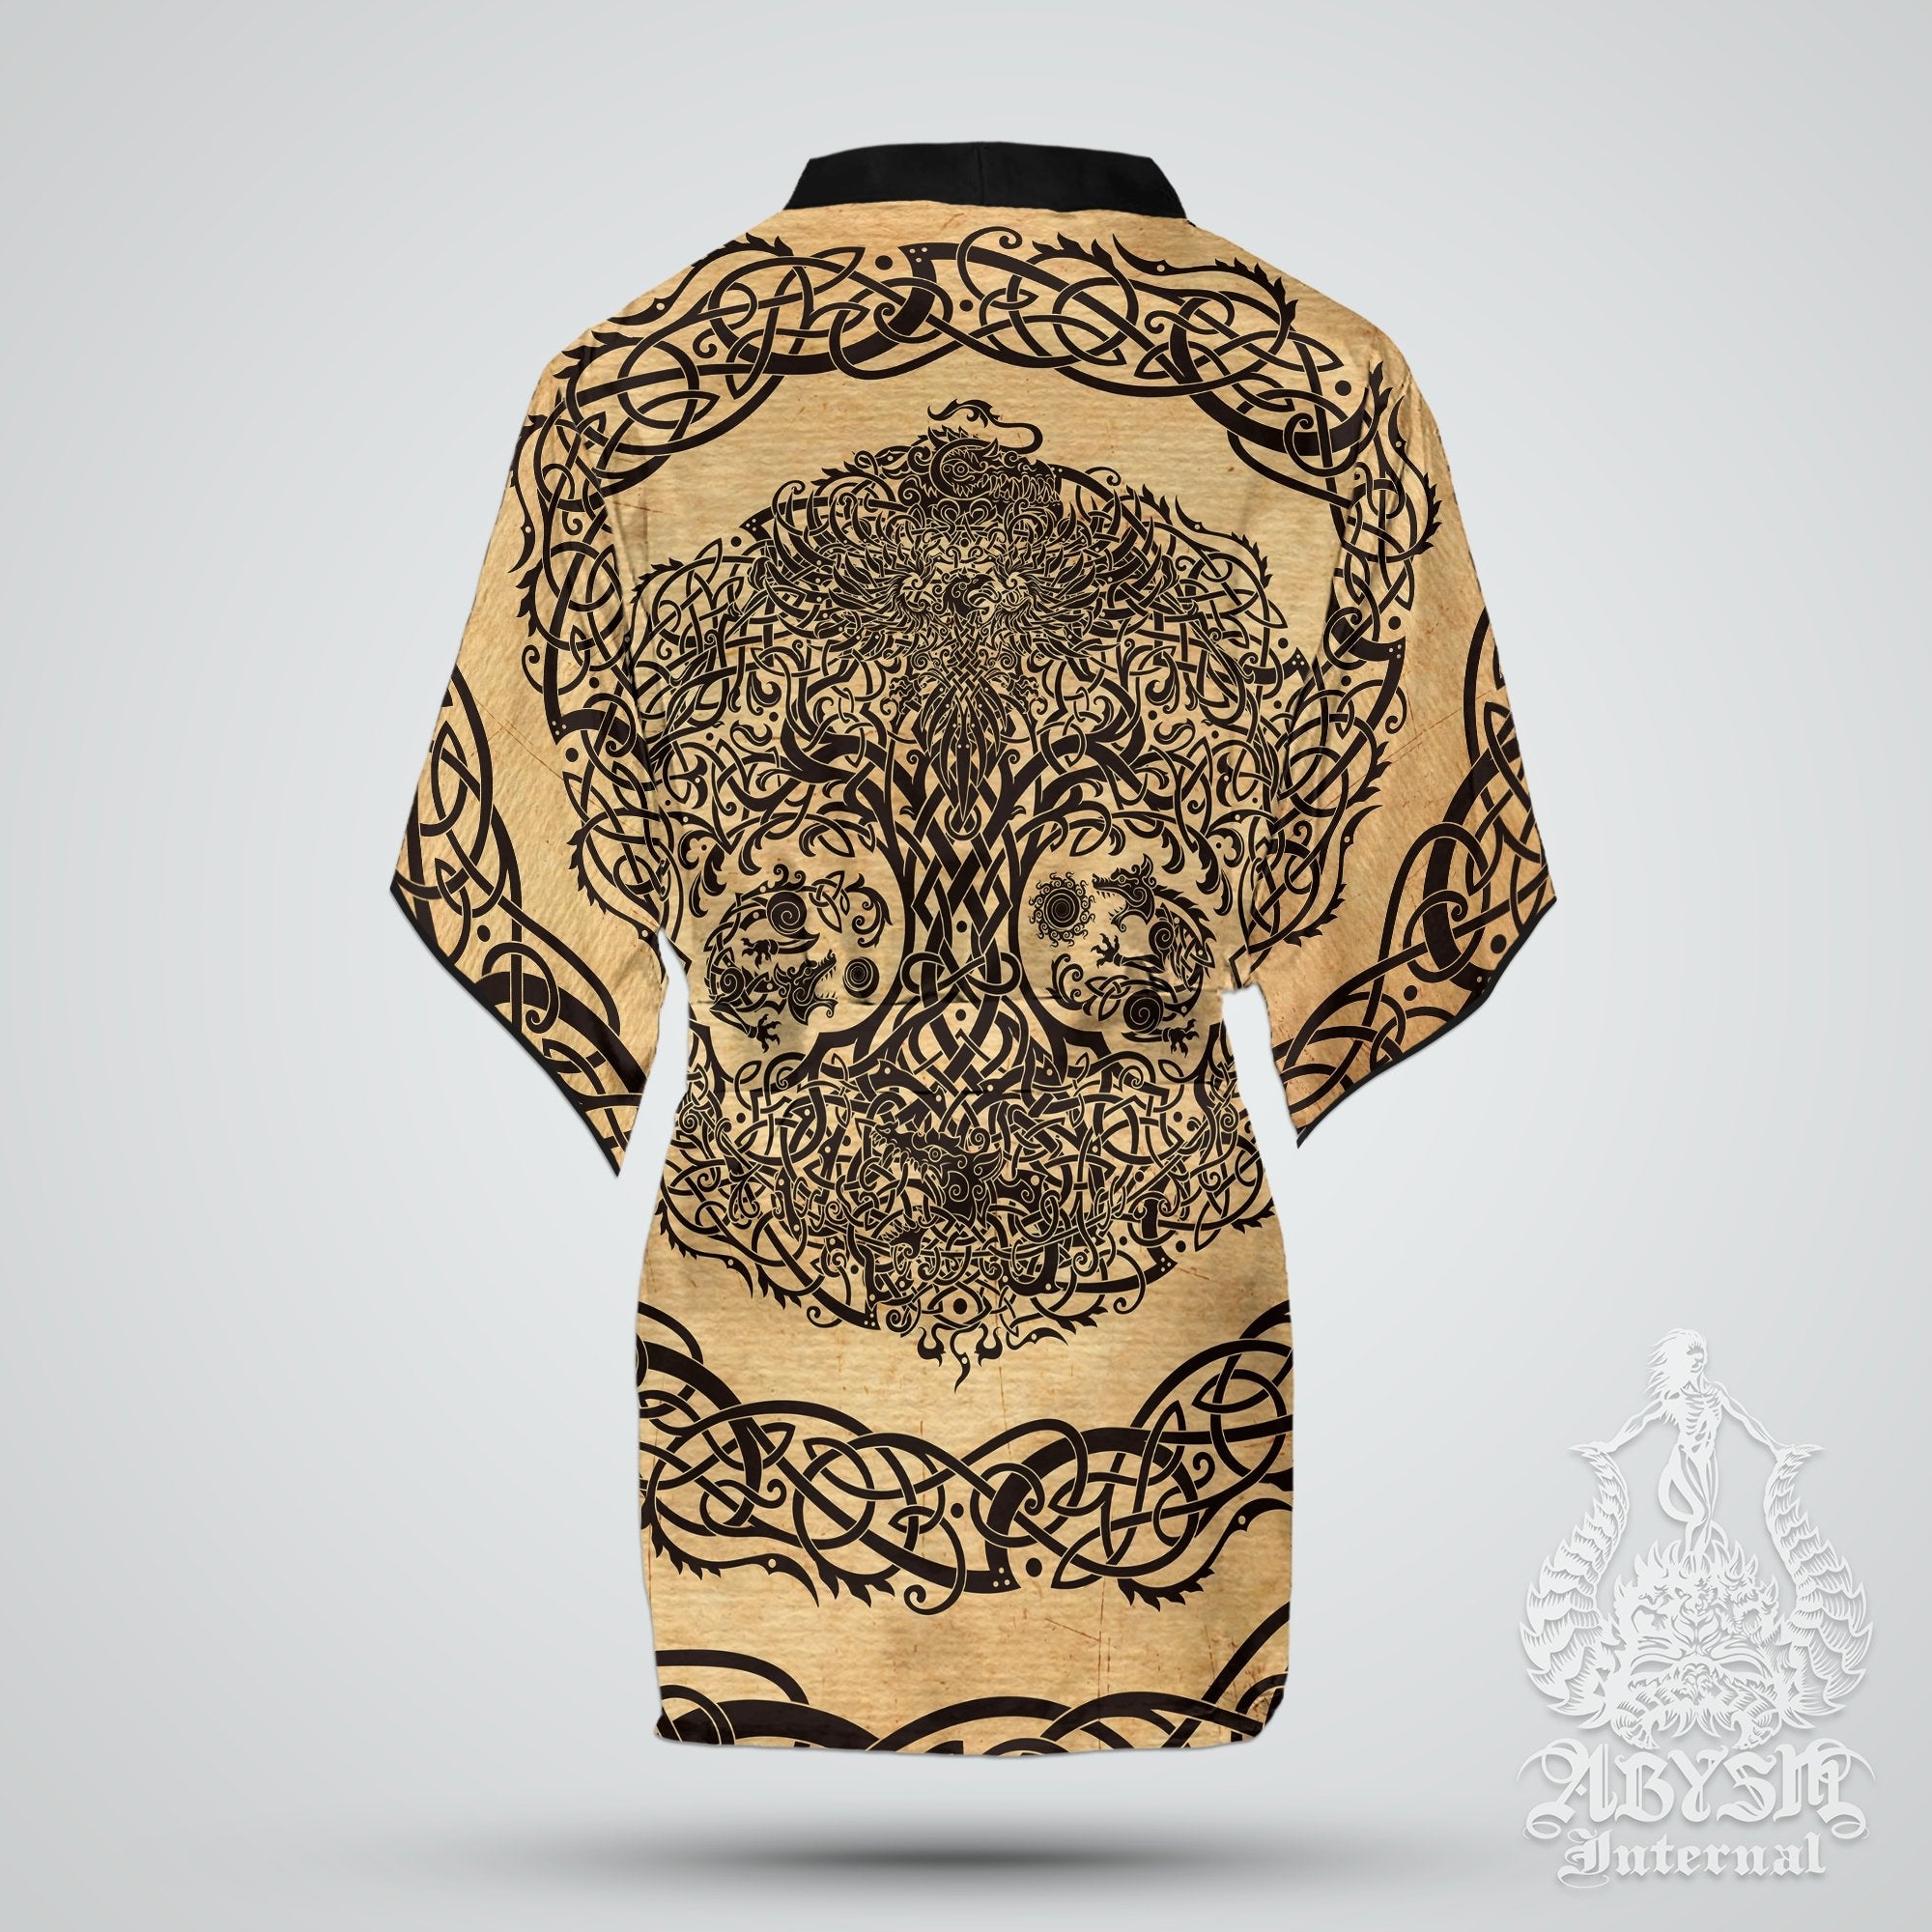 Viking Cover Up, Beach Outfit, Yggdrasil Party Kimono, Summer Festival Robe, Norse Indie and Alternative Clothing, Unisex - Tree of Life, Paper - Abysm Internal